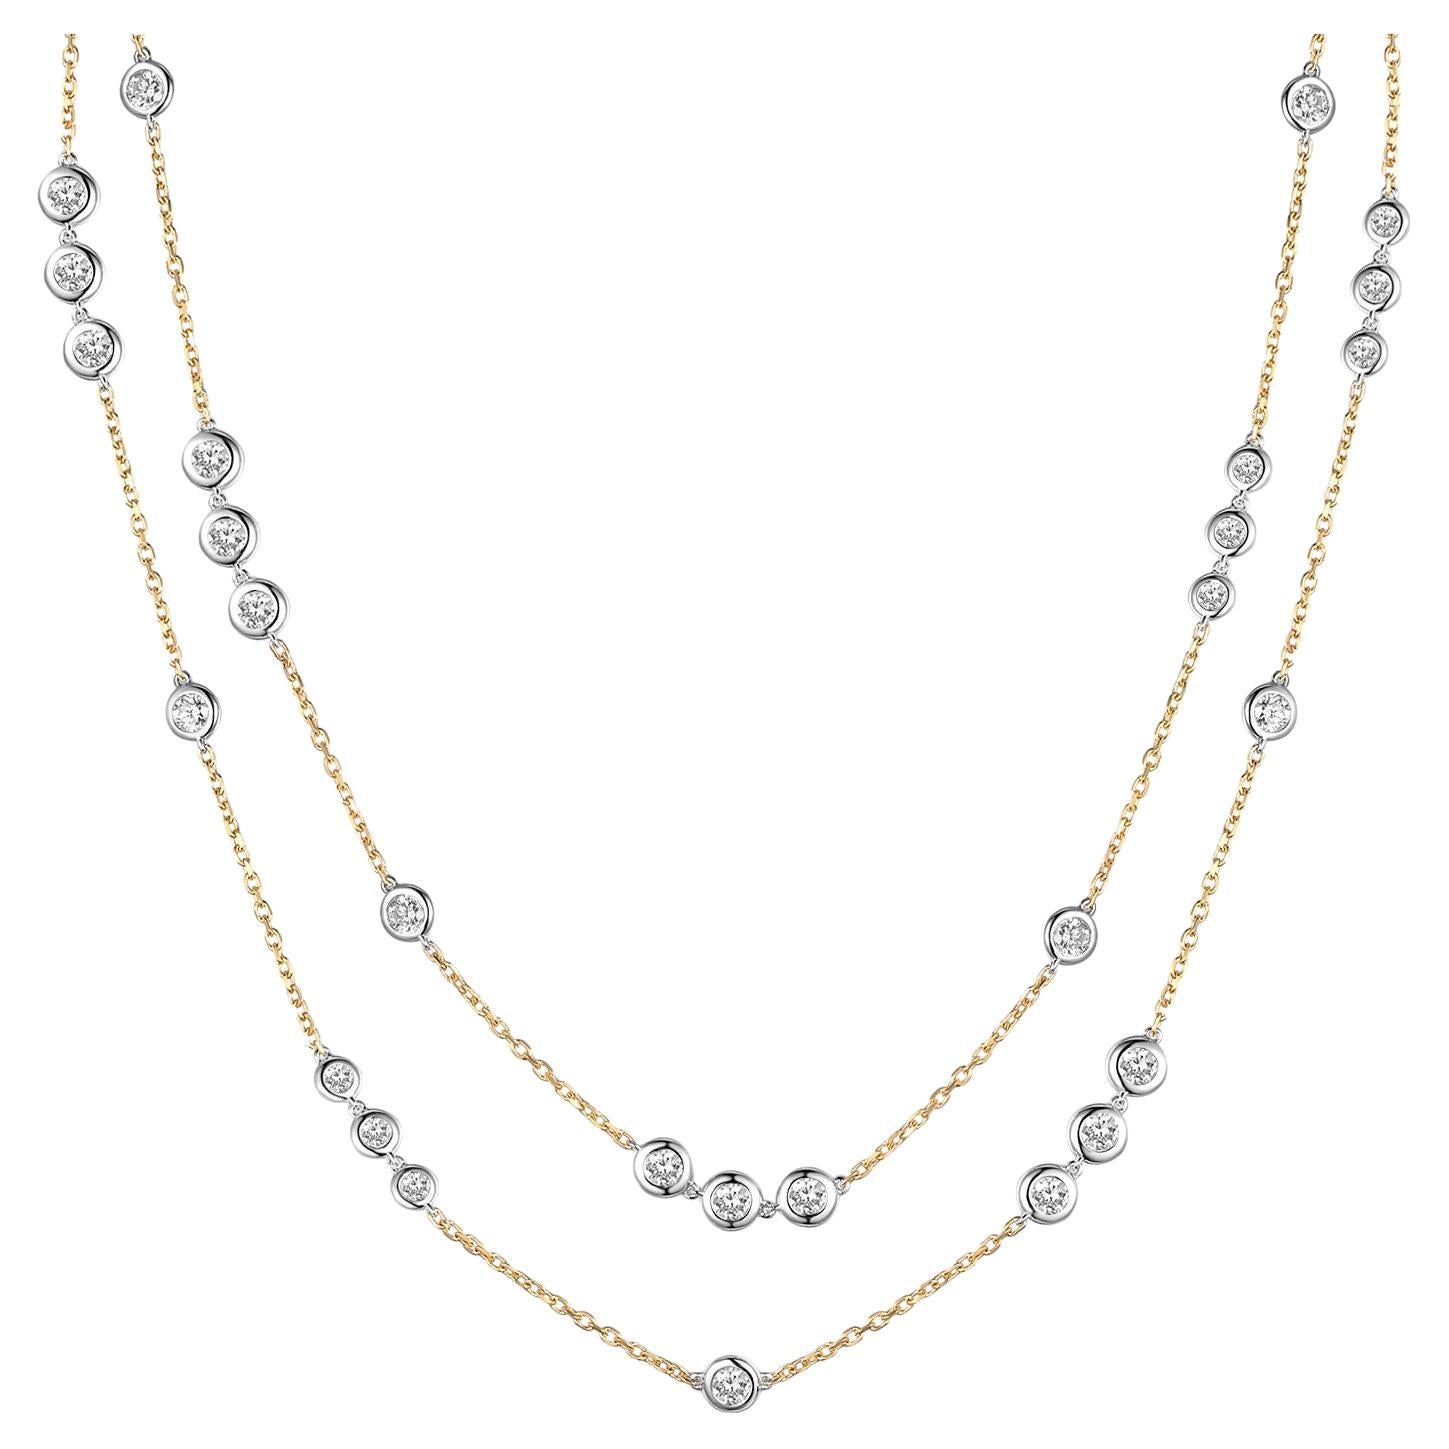 4.12 Carat 29-Station Diamond by The Yard Necklace in 18 Karat Yellow Gold For Sale